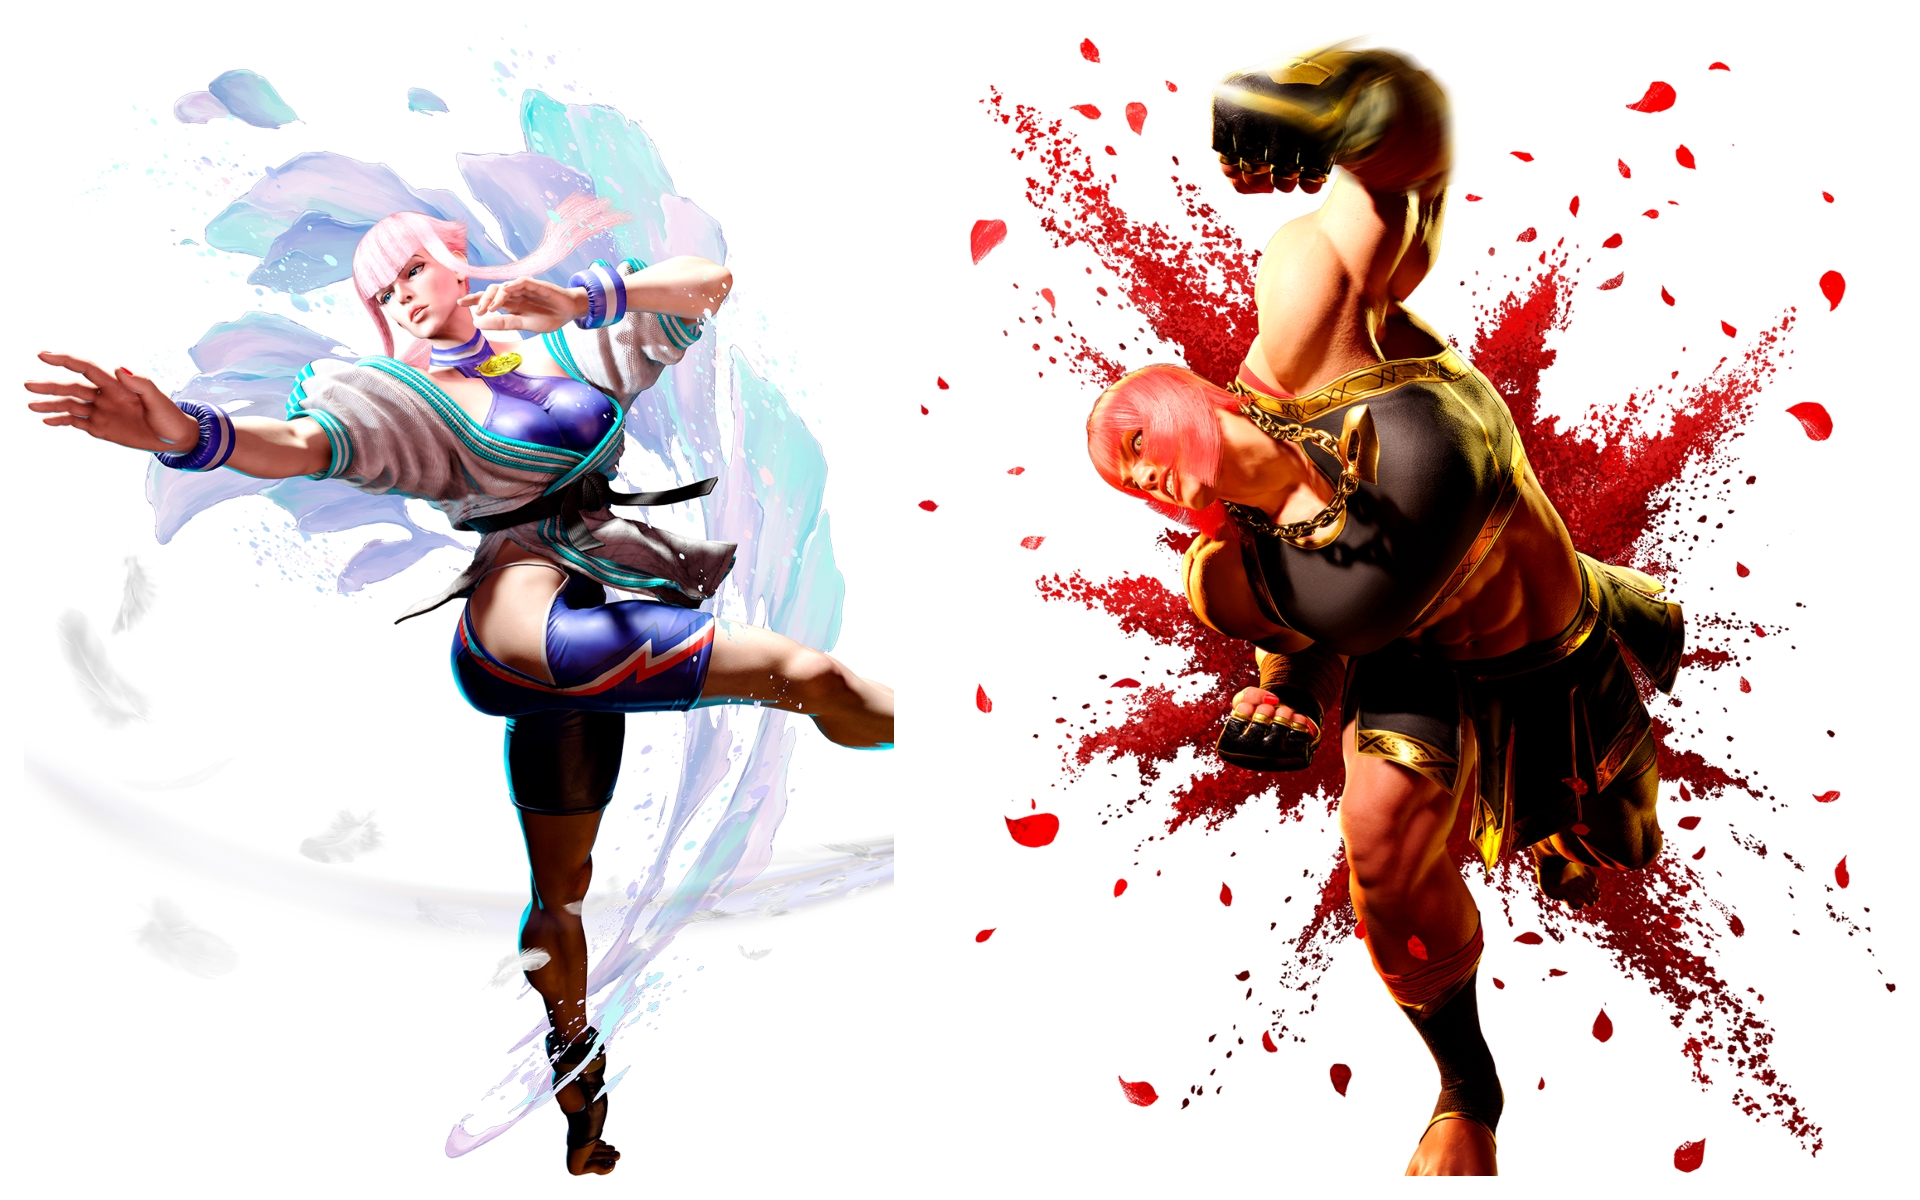 According to Capcom, Street Fighter 6 new characters Dee Jay, Manon, Marisa, and JP will be playable. Additionally mentioned were pre-order incentives, game...